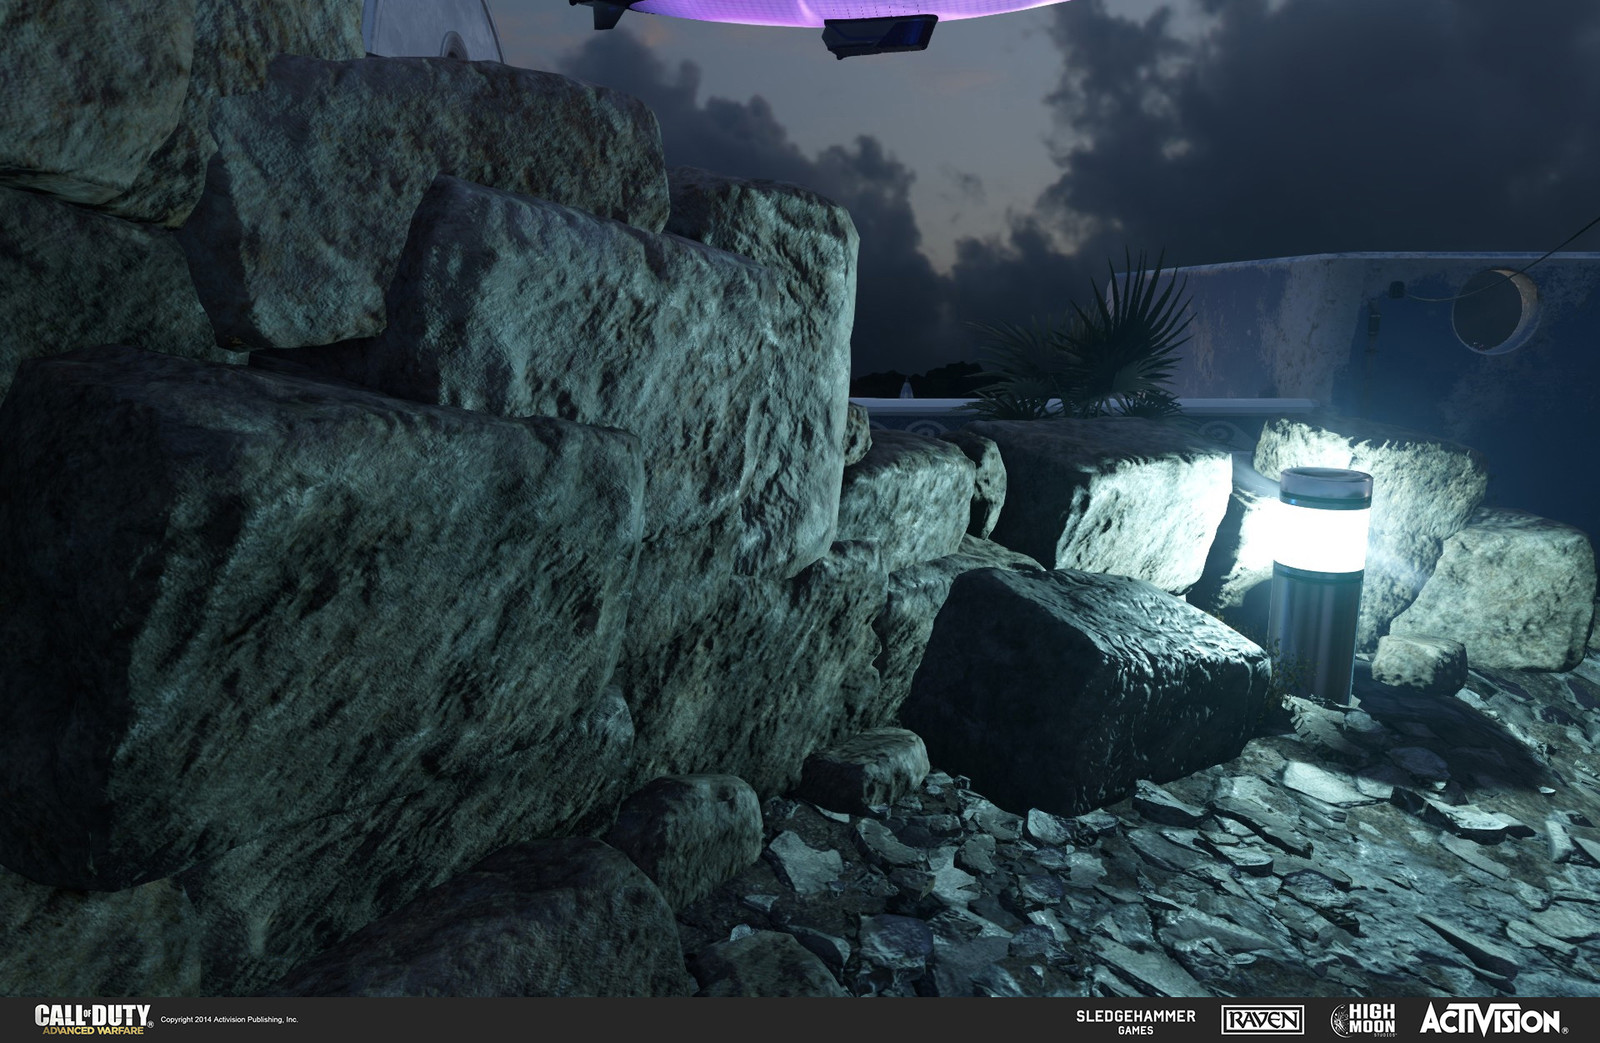 Created rock models and light canister in the ruins of Terrace. The rocks were done in Z-Brush and the light canister in 3DSMax.